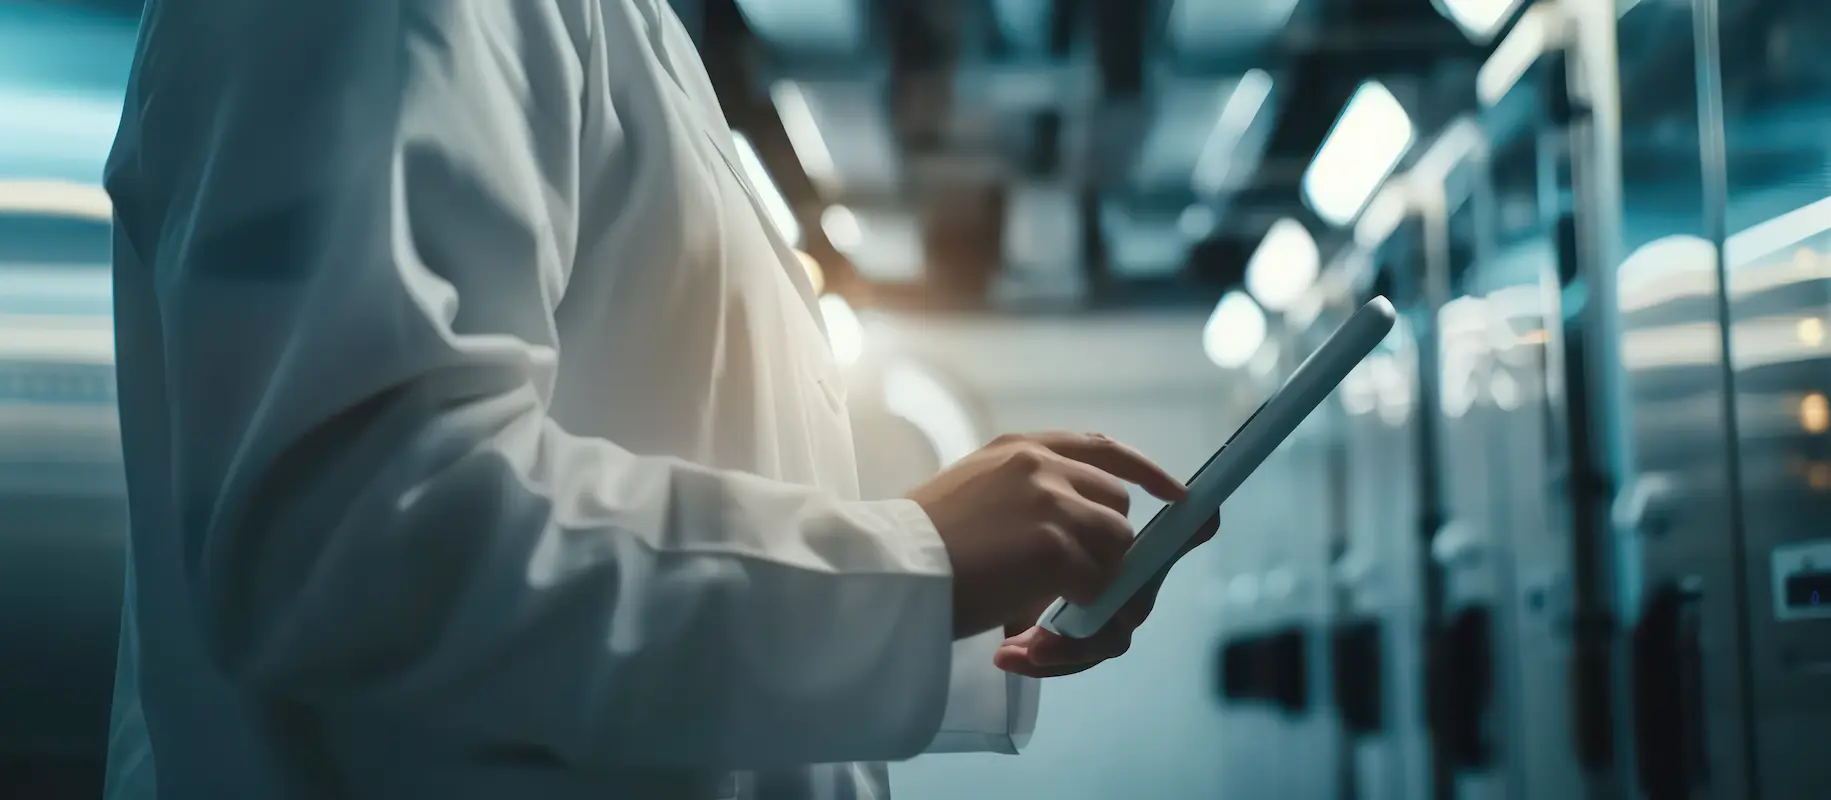 A person in a white lab coat is using a tablet while standing in a high-tech, dimly lit server room.